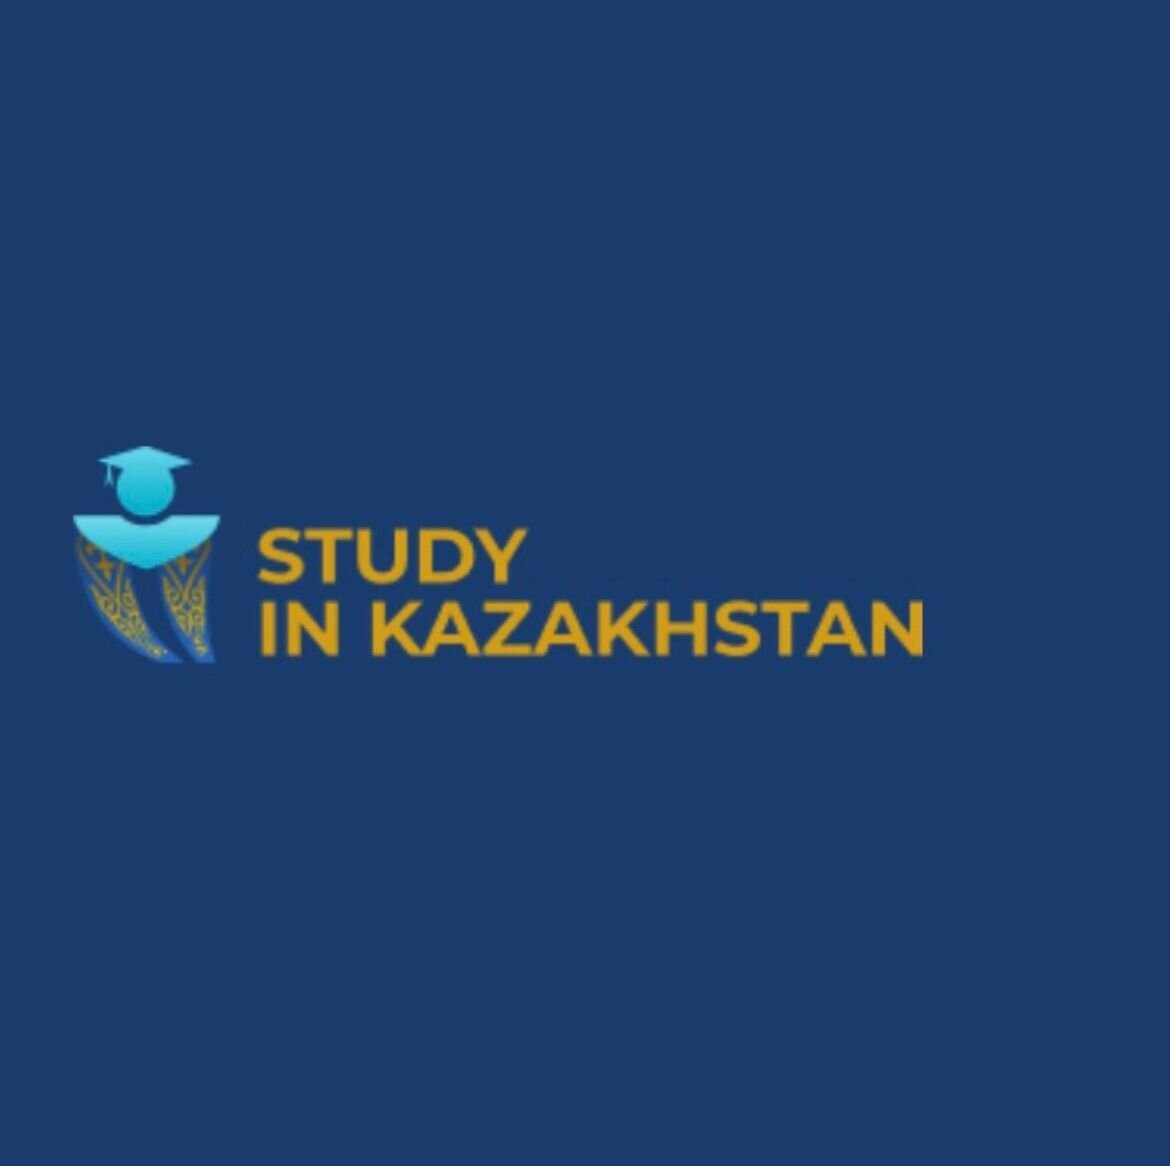 Scholarship program for foreign students to study at universities in Kazakhstan